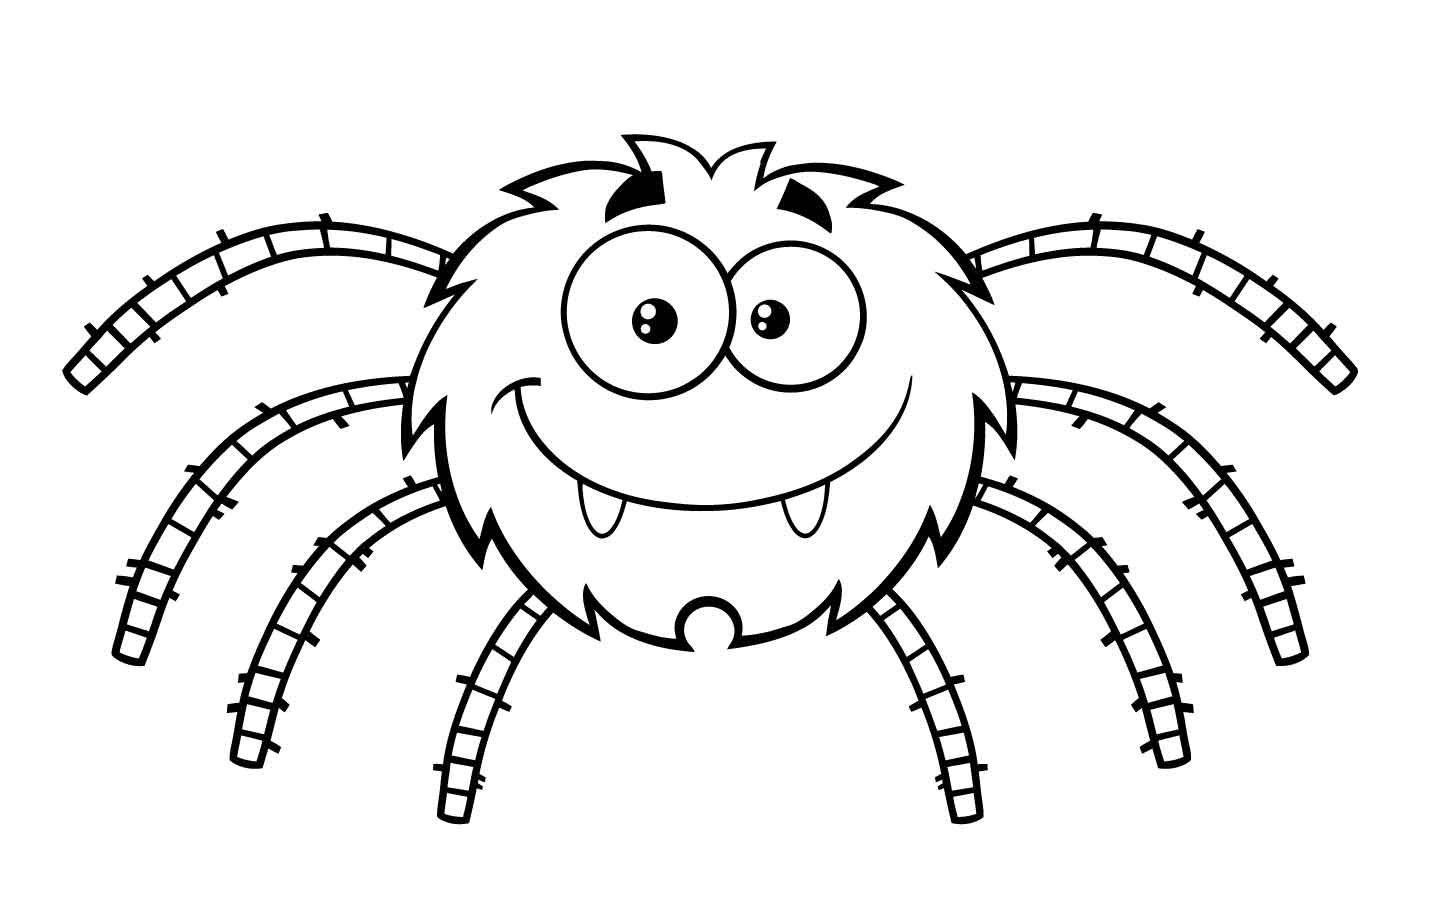 Printable Halloween Spider Coloring Pages_36928